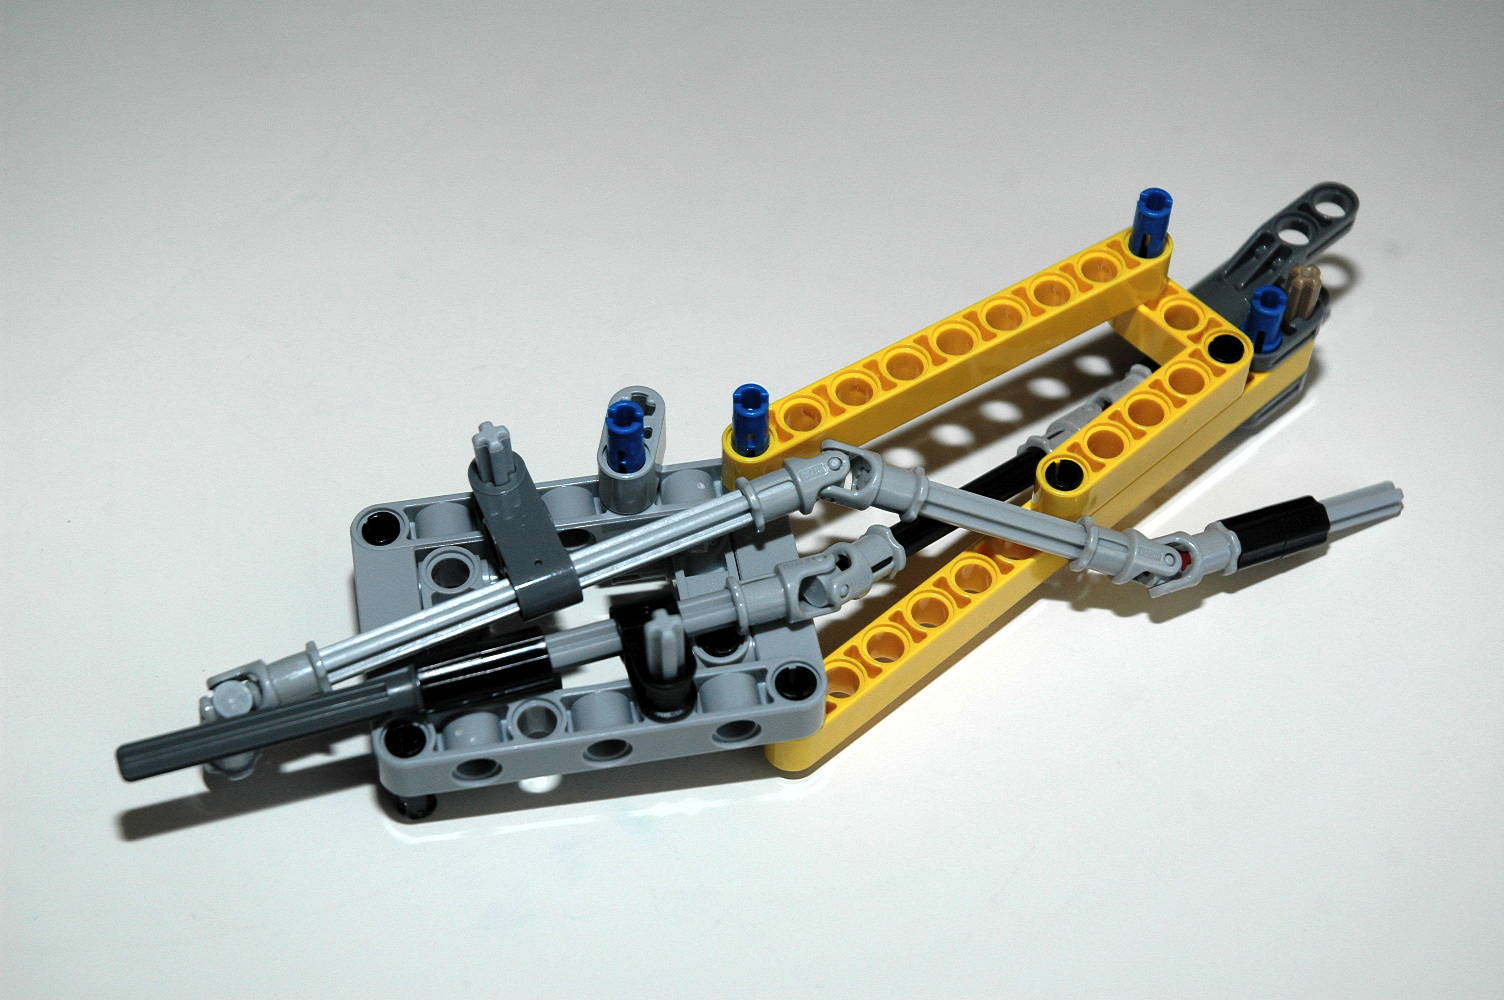 REVIEW] 8043 - Excavator - LEGO Technic, Mindstorms, Team and Scale Modeling